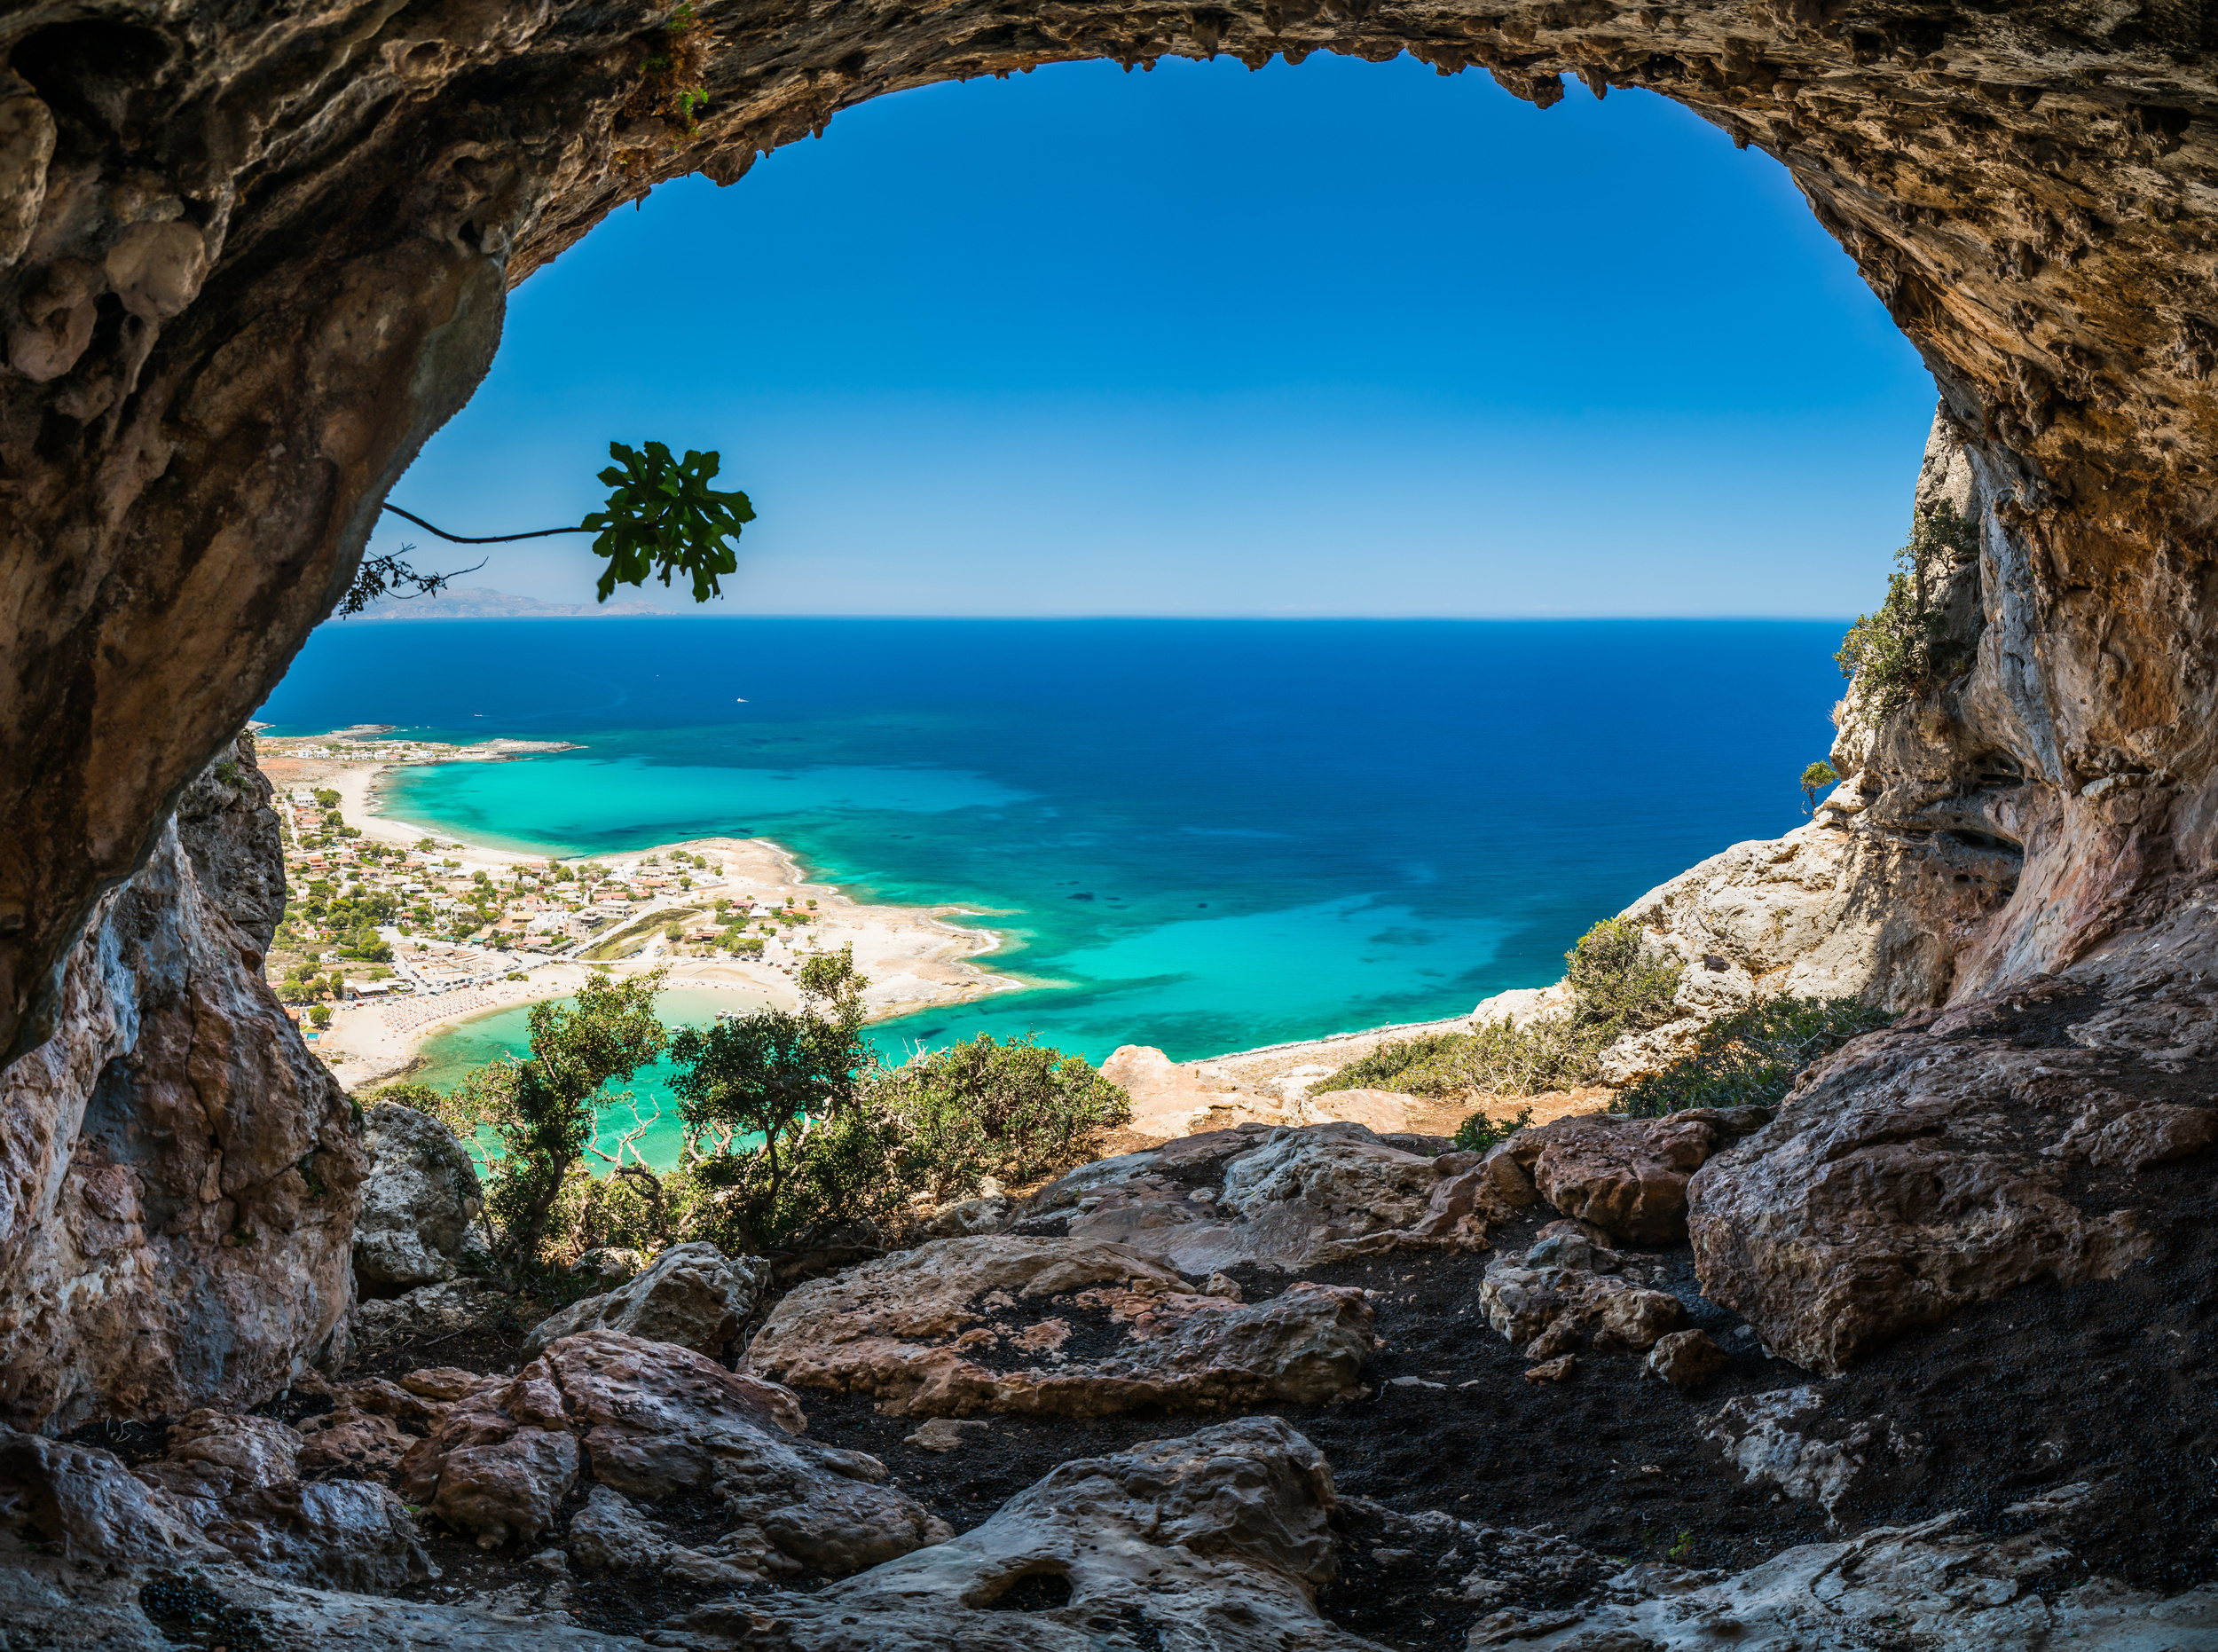 <p>Everyone envisions the ideal Mediterranean getaway as island-hopping in Greece. From the most famous islands like Santorini and Mykonos to lesser-known gems such as Paros, Zakynthos, and Hydra, you’re sure to have a great vacation.</p><p>You may also like: <a href='https://www.yardbarker.com/lifestyle/articles/20_cookies_you_probably_never_tried_before_but_should_021324/s1__19984099'>20 cookies you probably never tried before (but should!)</a></p>